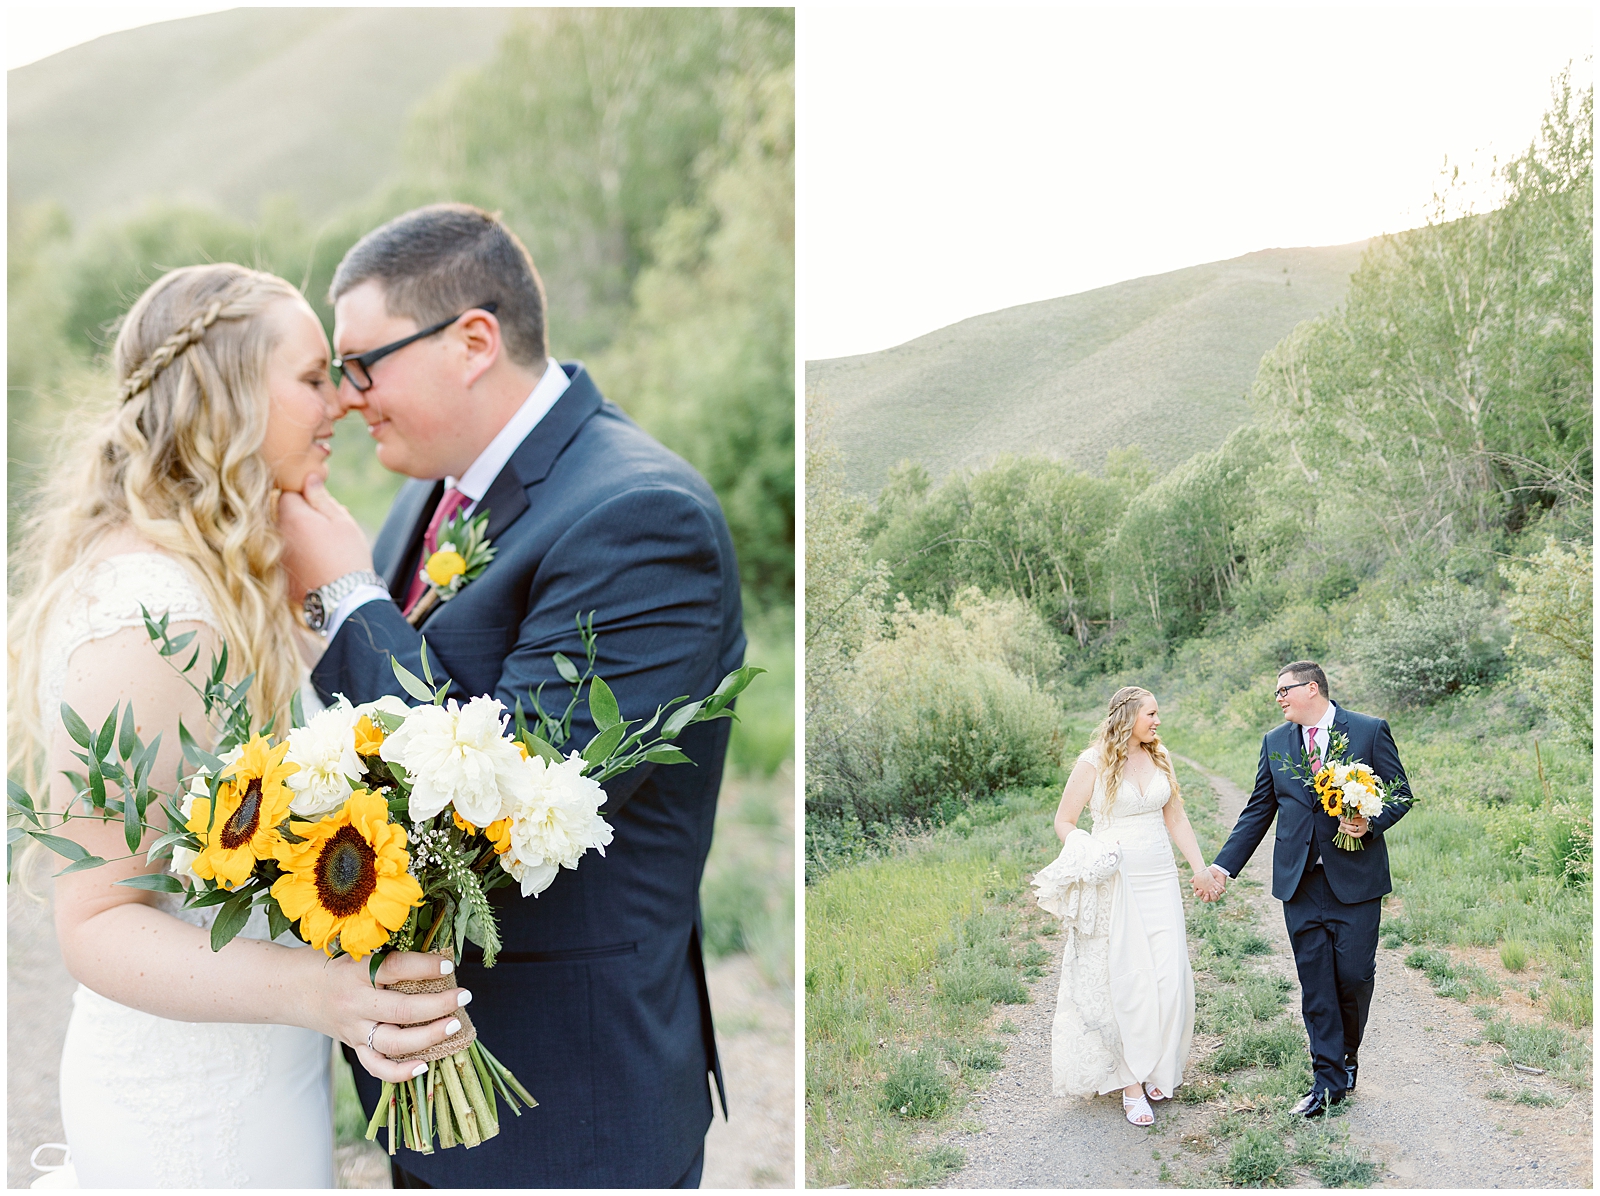 Husband and Wife Golden Hour Portraits at Trail Creek Cabin Wedding in Sun Valley, Idaho